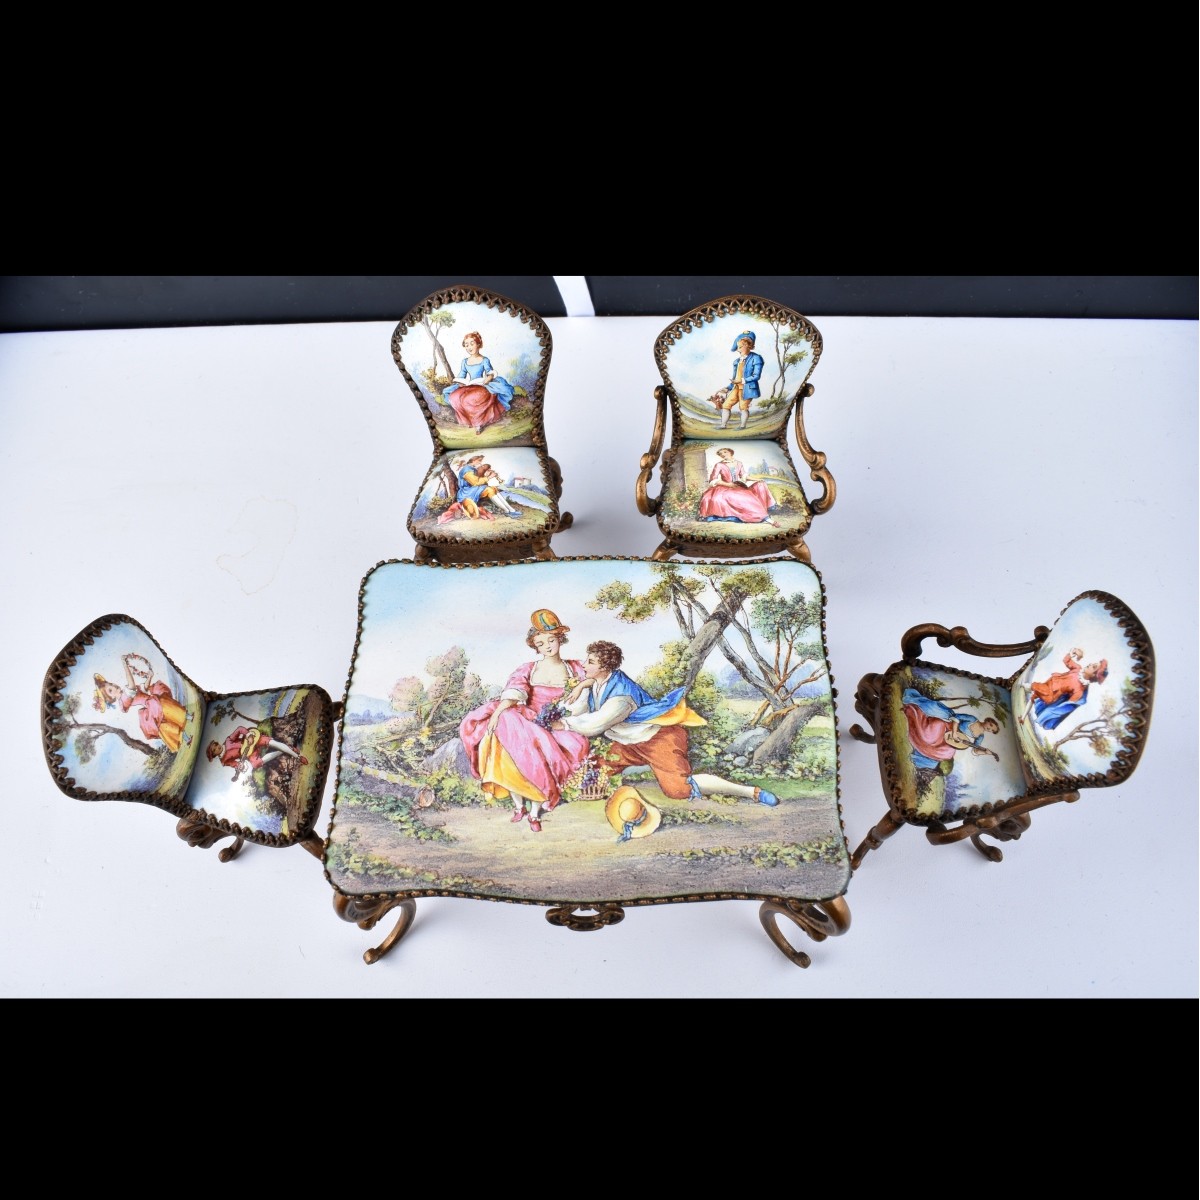 Antique Viennese Enamel Miniature Table and Chairs